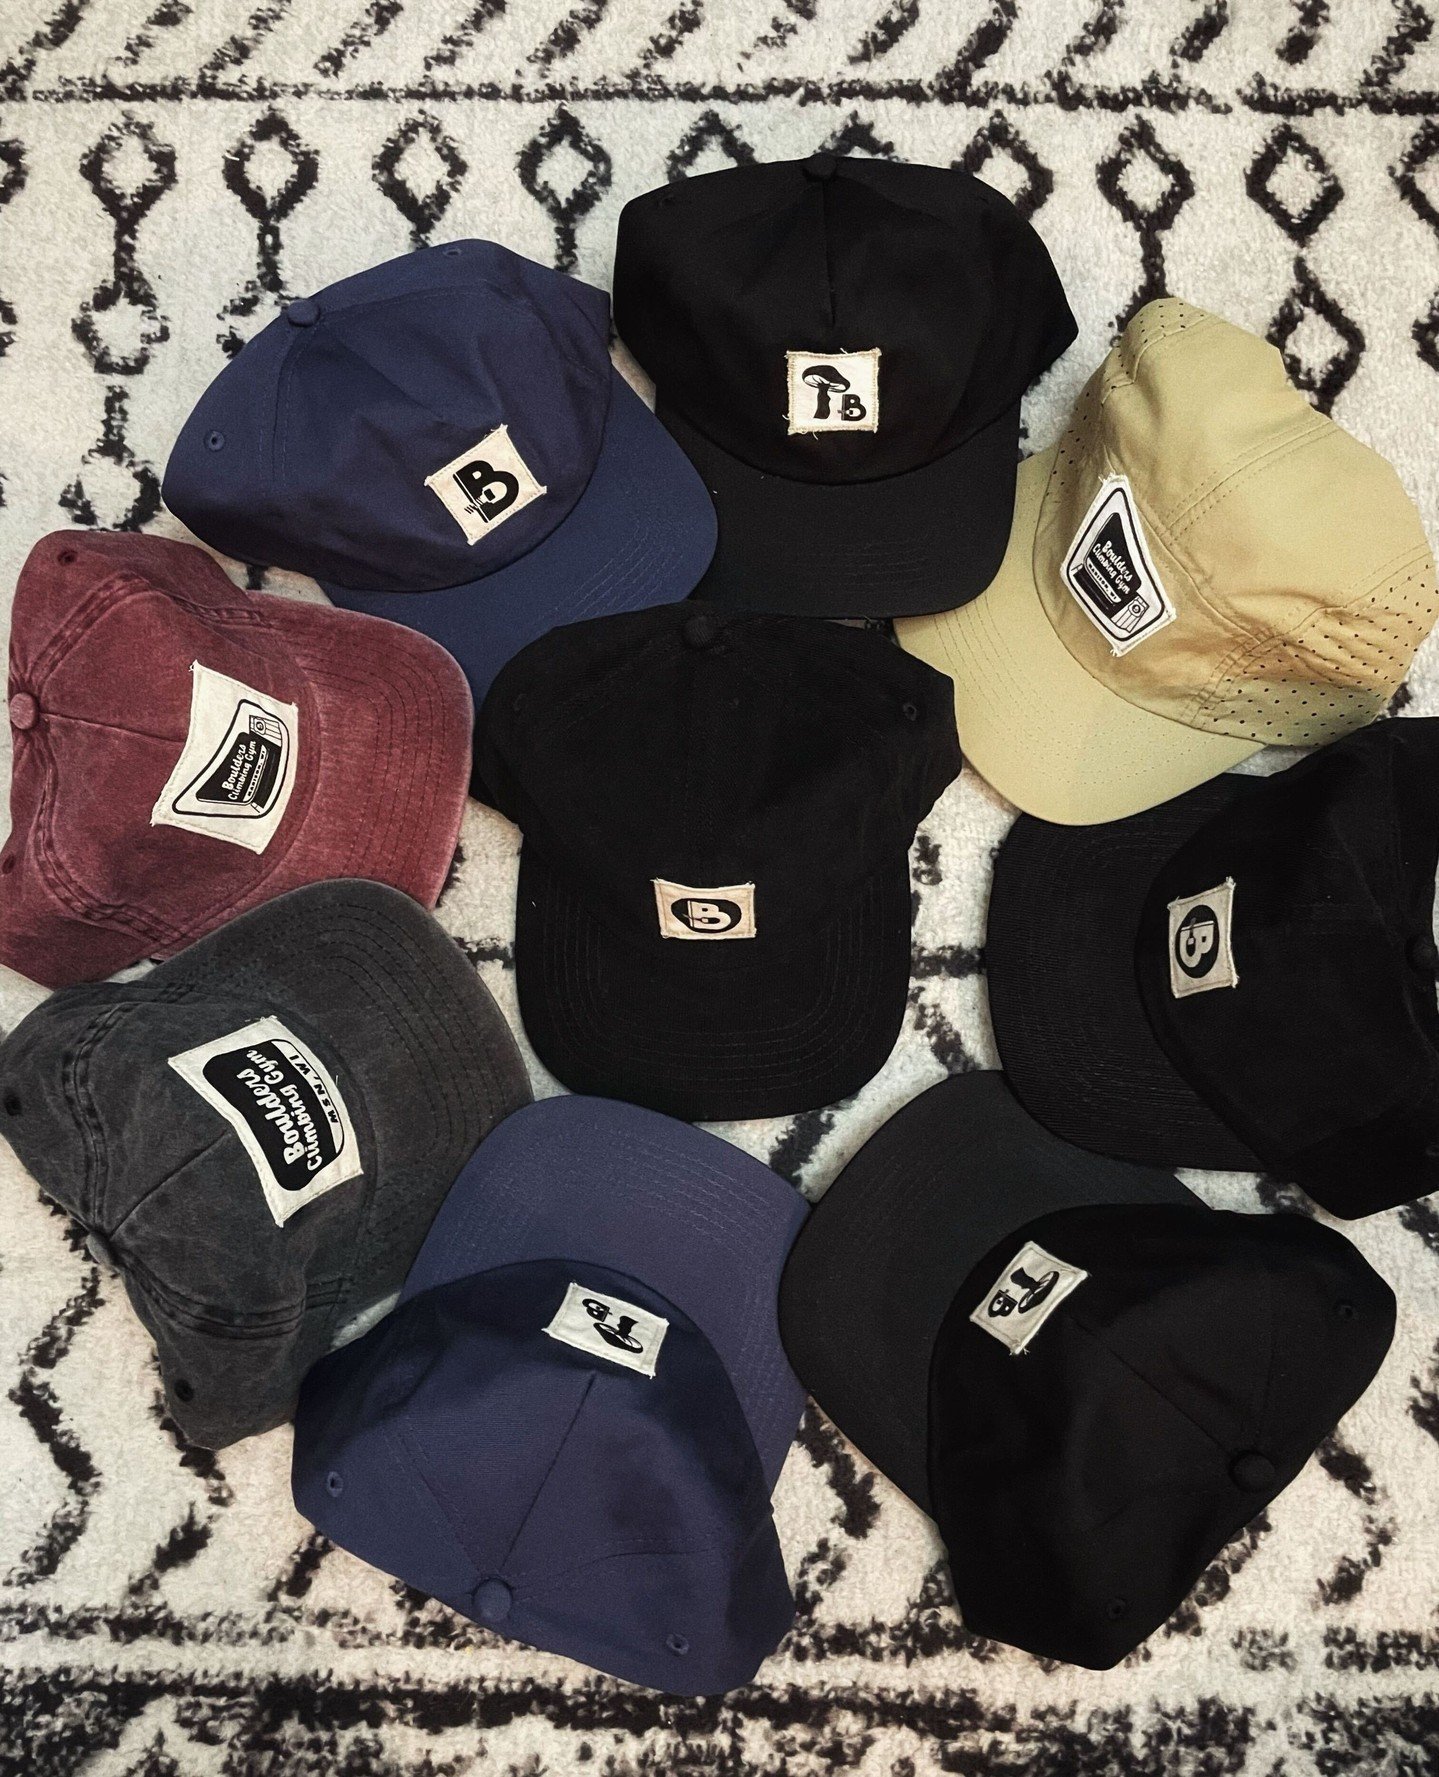 Getting ready for the sunny days ahead!⁠
⁠
Check out the Boulders hats at both of our locations!⁠
⁠
#indoorclimbing #madison #onlyinmadison #rockcllimbing #climbing #stayactive #fall #fallactivity #localmadison #madisonwisconsin #fitnessclass #commun